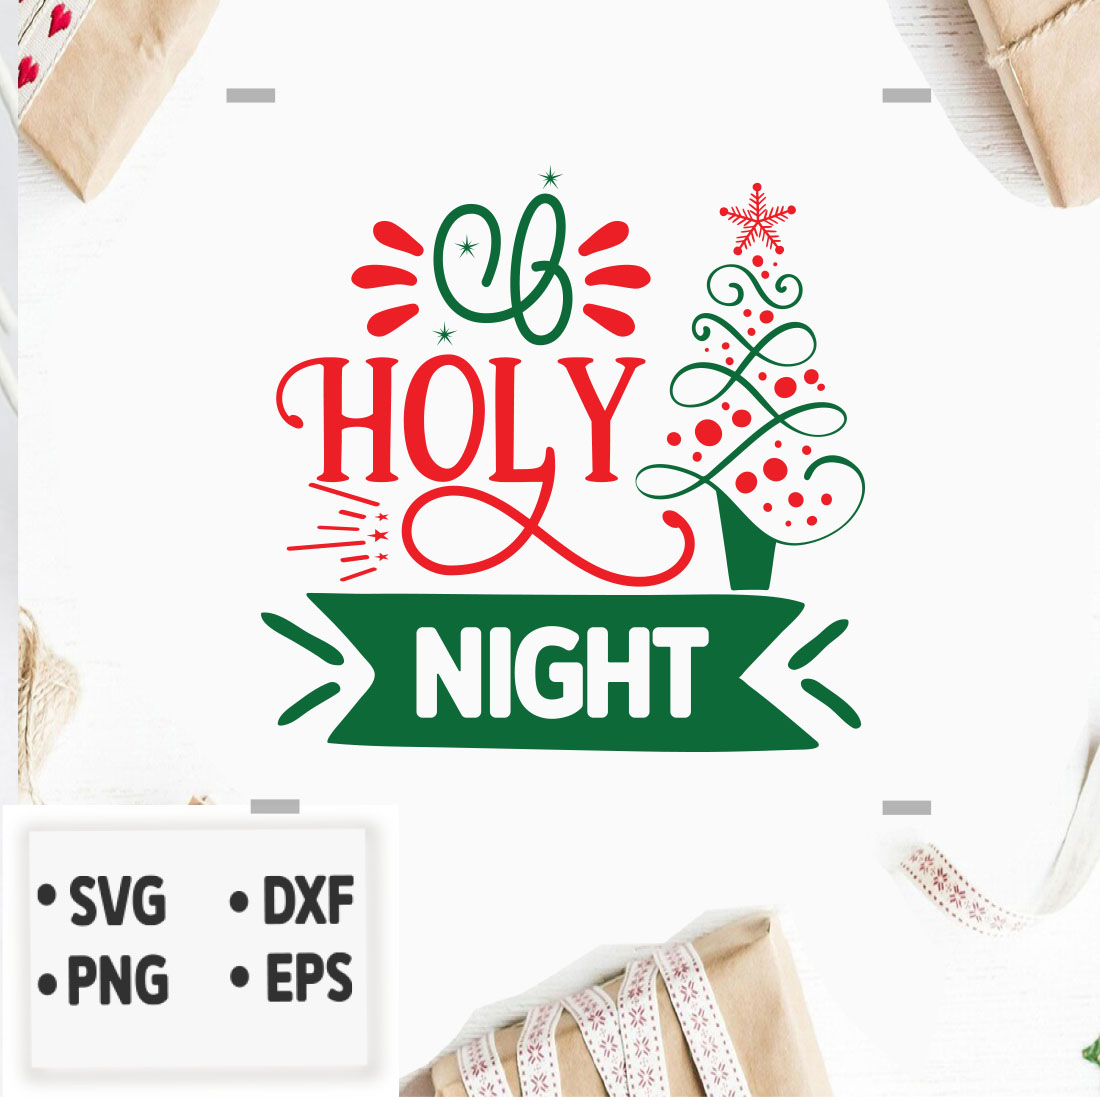 Image with colorful inscription O Holy night.